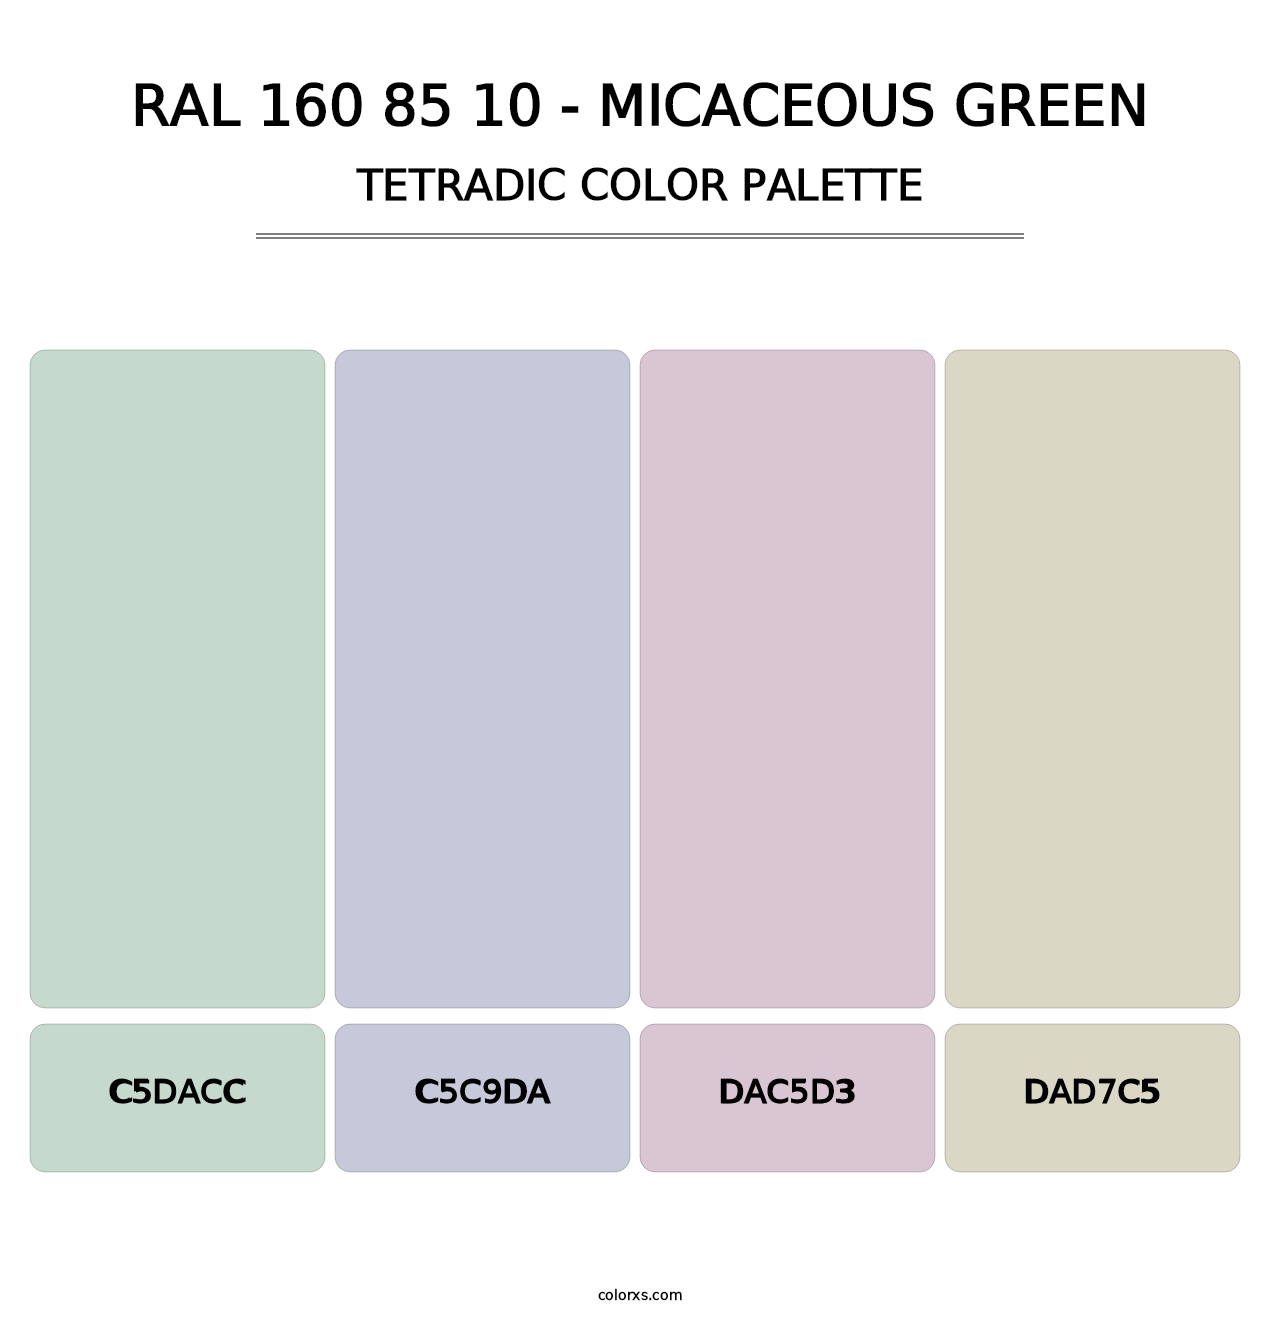 RAL 160 85 10 - Micaceous Green - Tetradic Color Palette